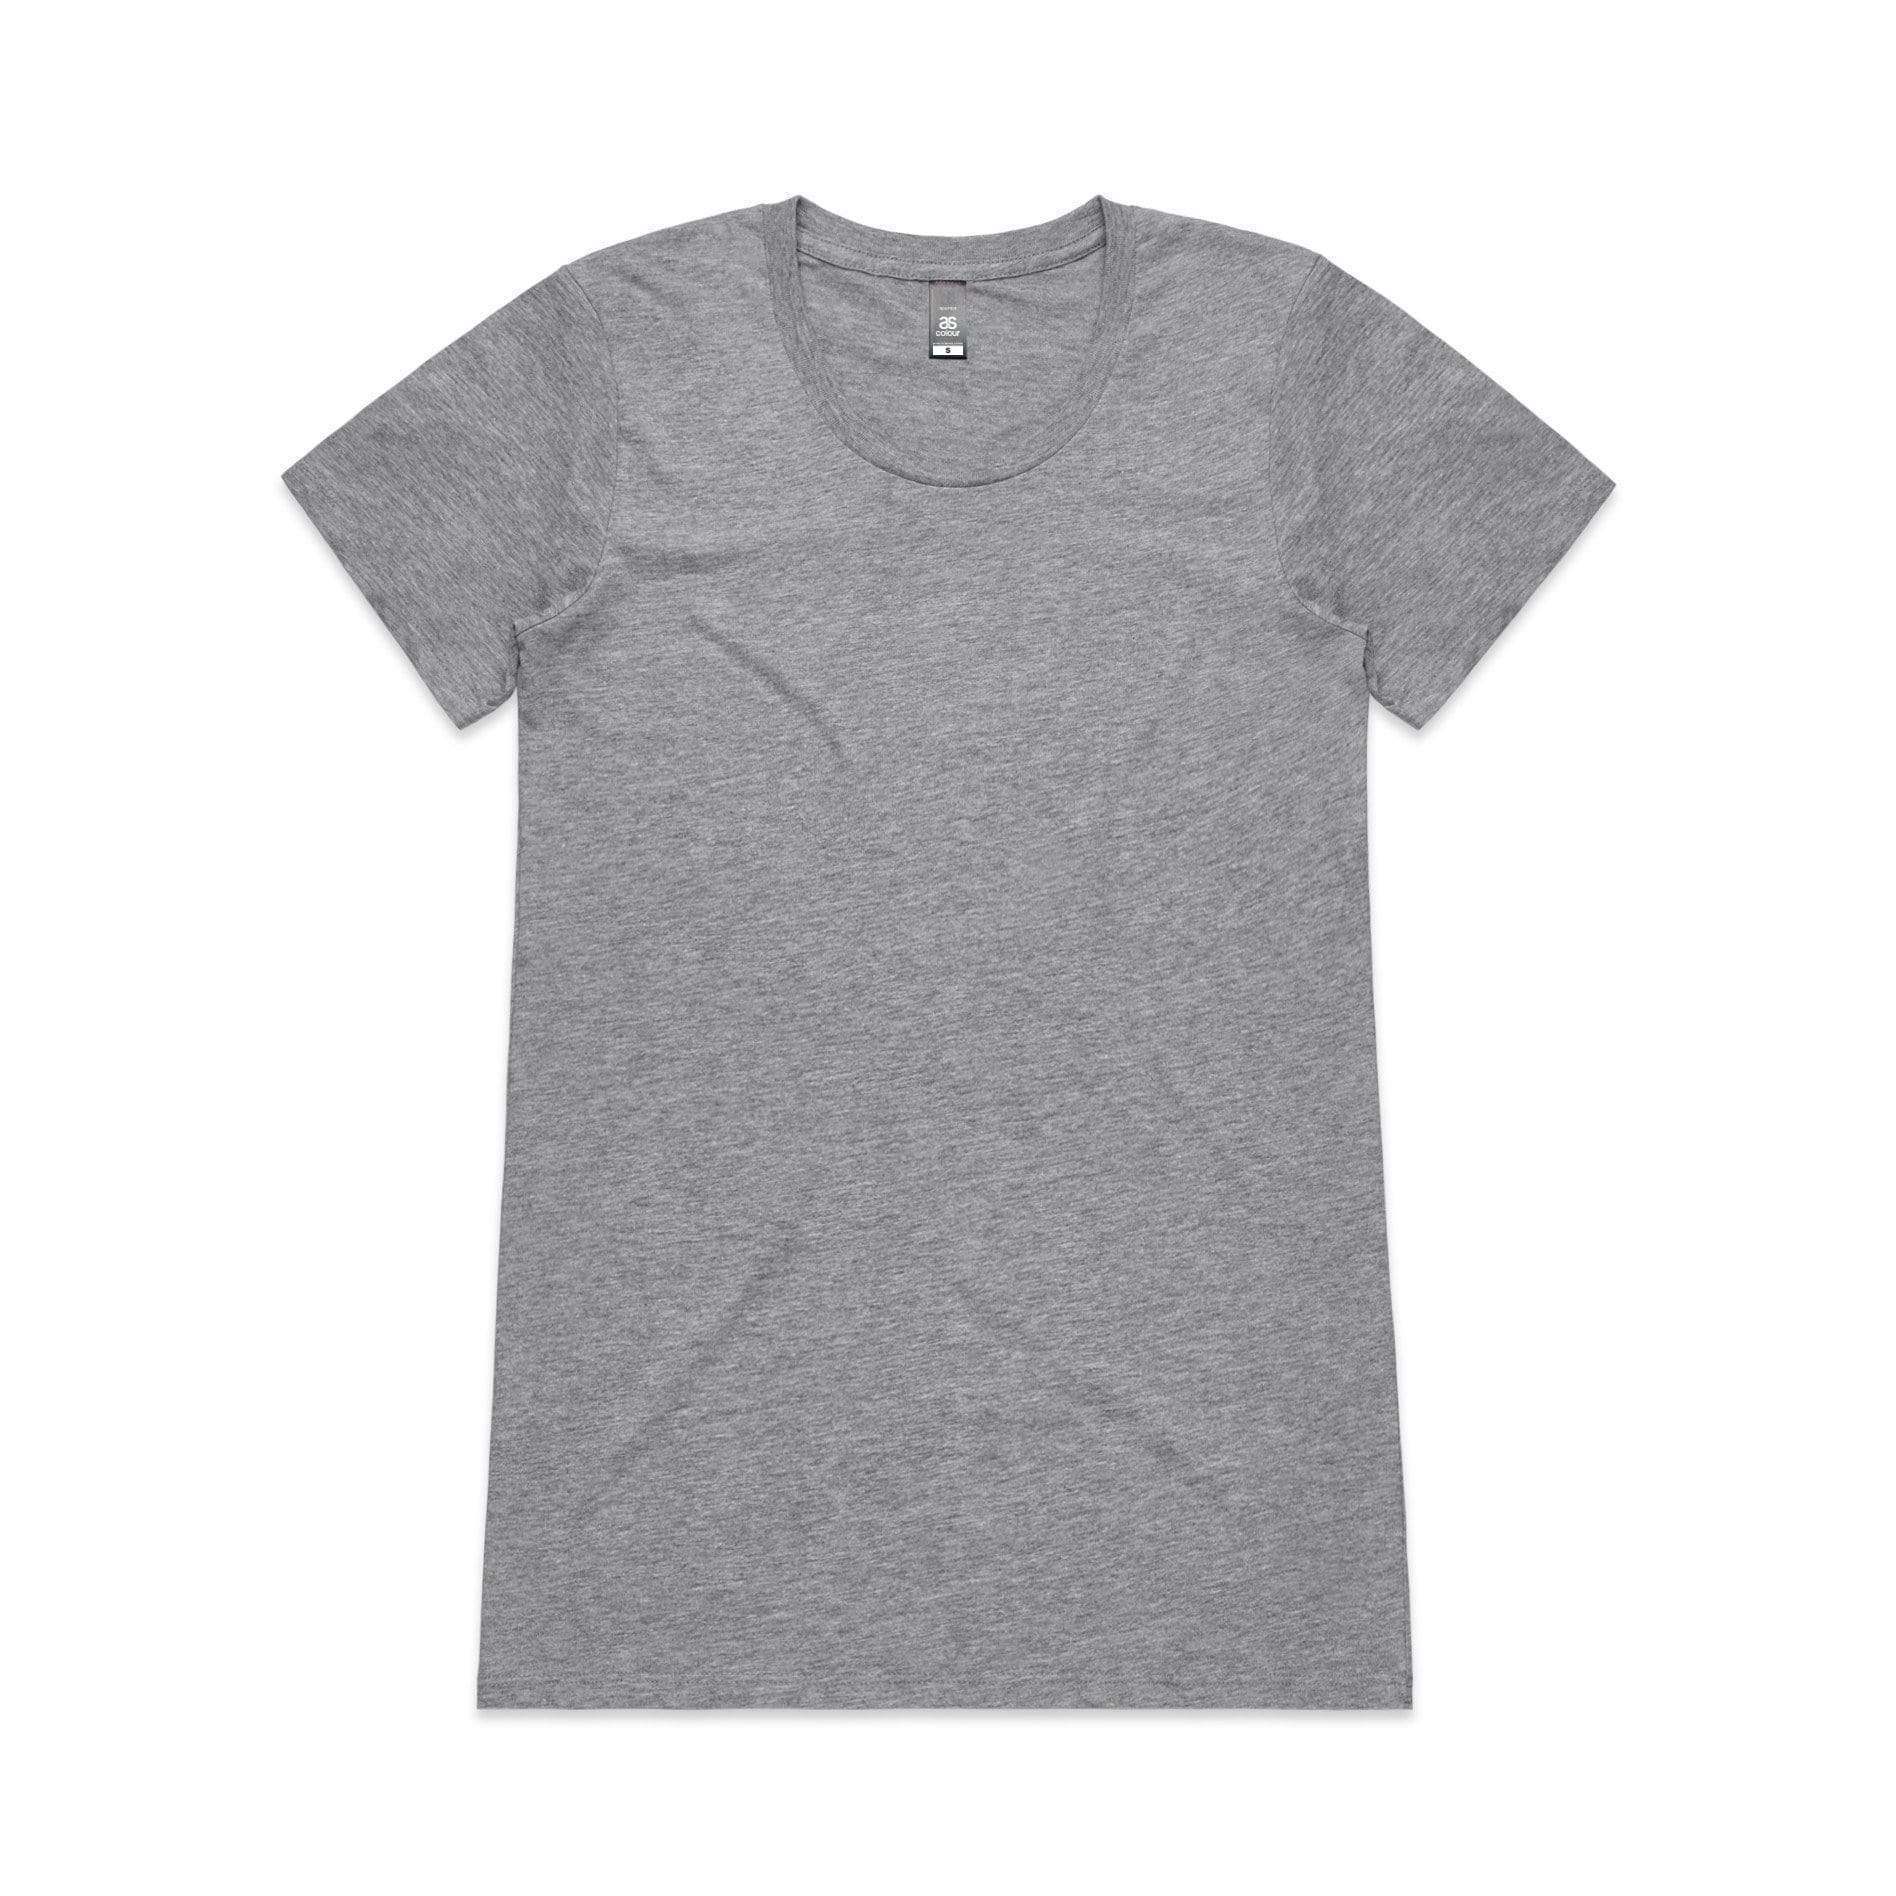 Printed As Colour Women's Wafer tee 4002 Casual Wear As Colour GREY MARLE XSM 